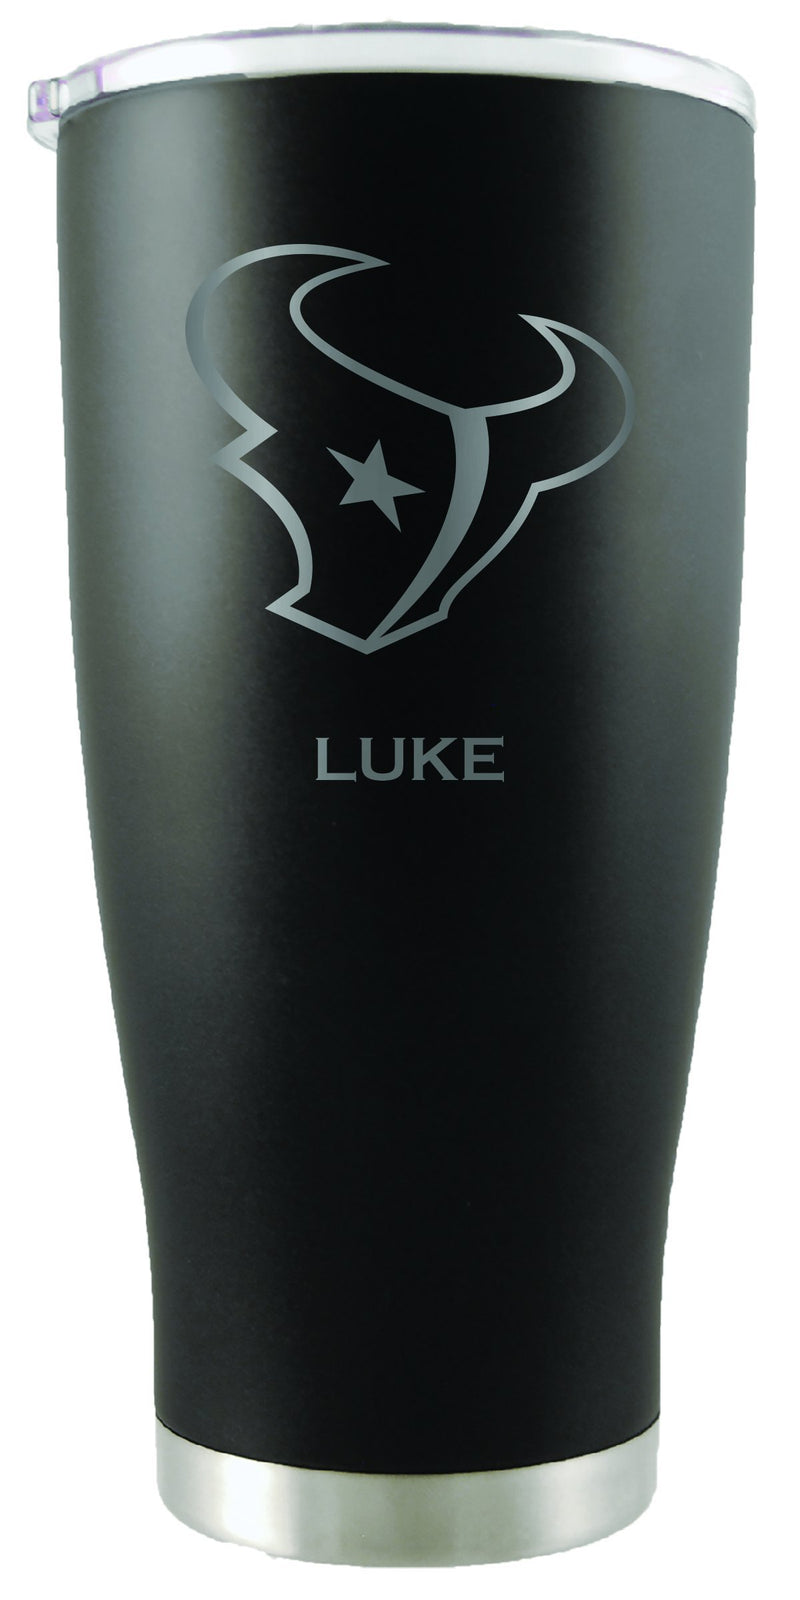 20oz Black Personalized Stainless Steel Tumbler | Houston Texans
CurrentProduct, Drinkware_category_All, Houston Texans, HTE, NFL, Personalized_Personalized, Stainless Steel
The Memory Company